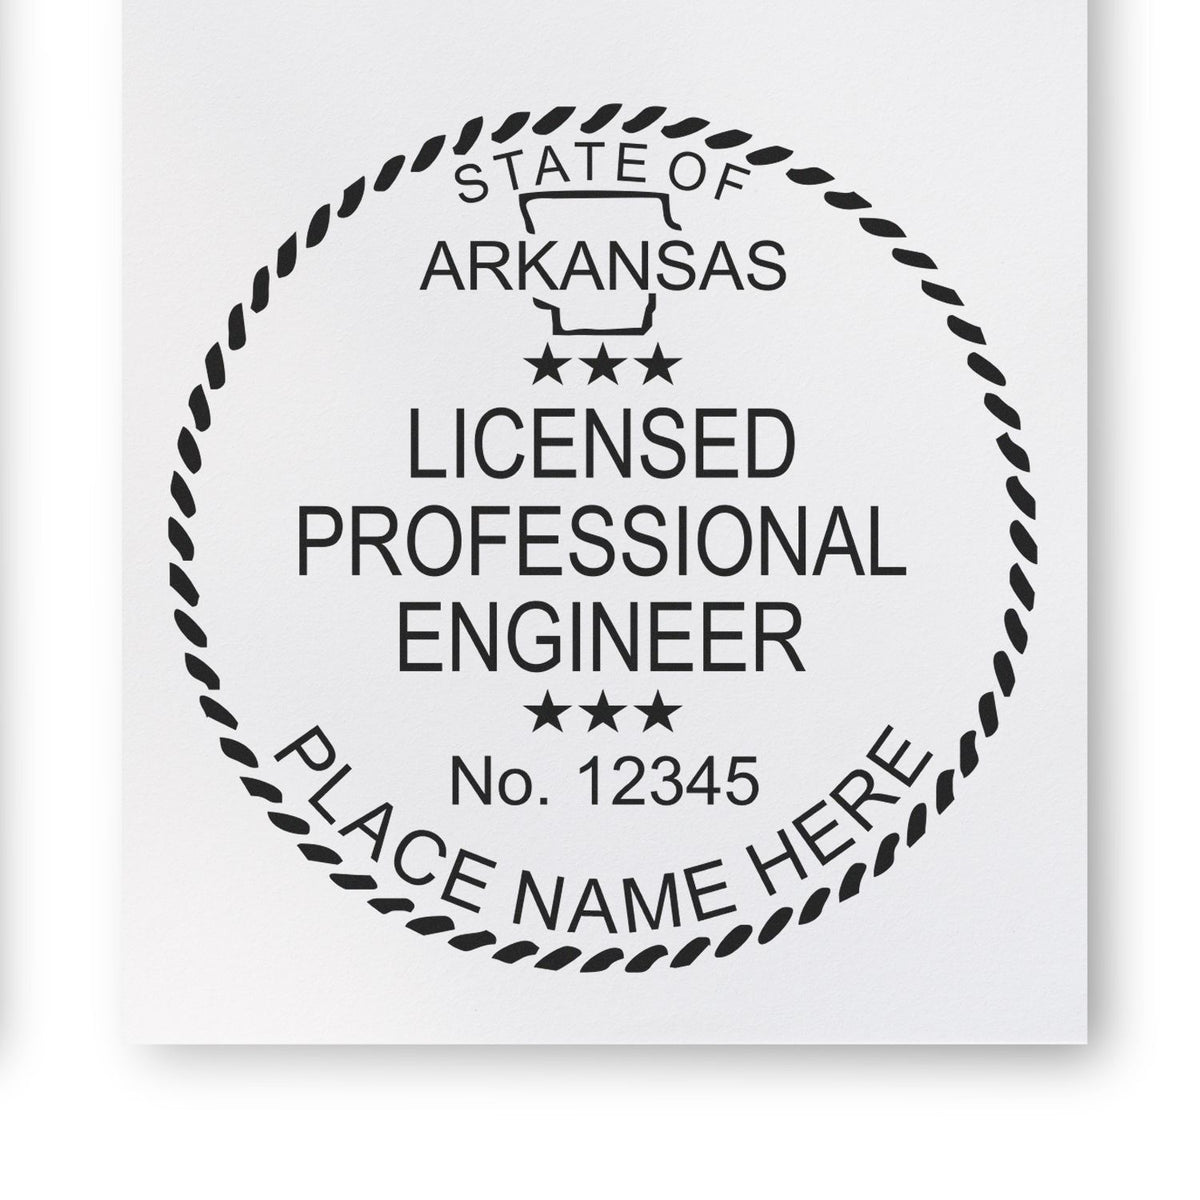 This paper is stamped with a sample imprint of the Arkansas Professional Engineer Seal Stamp, signifying its quality and reliability.